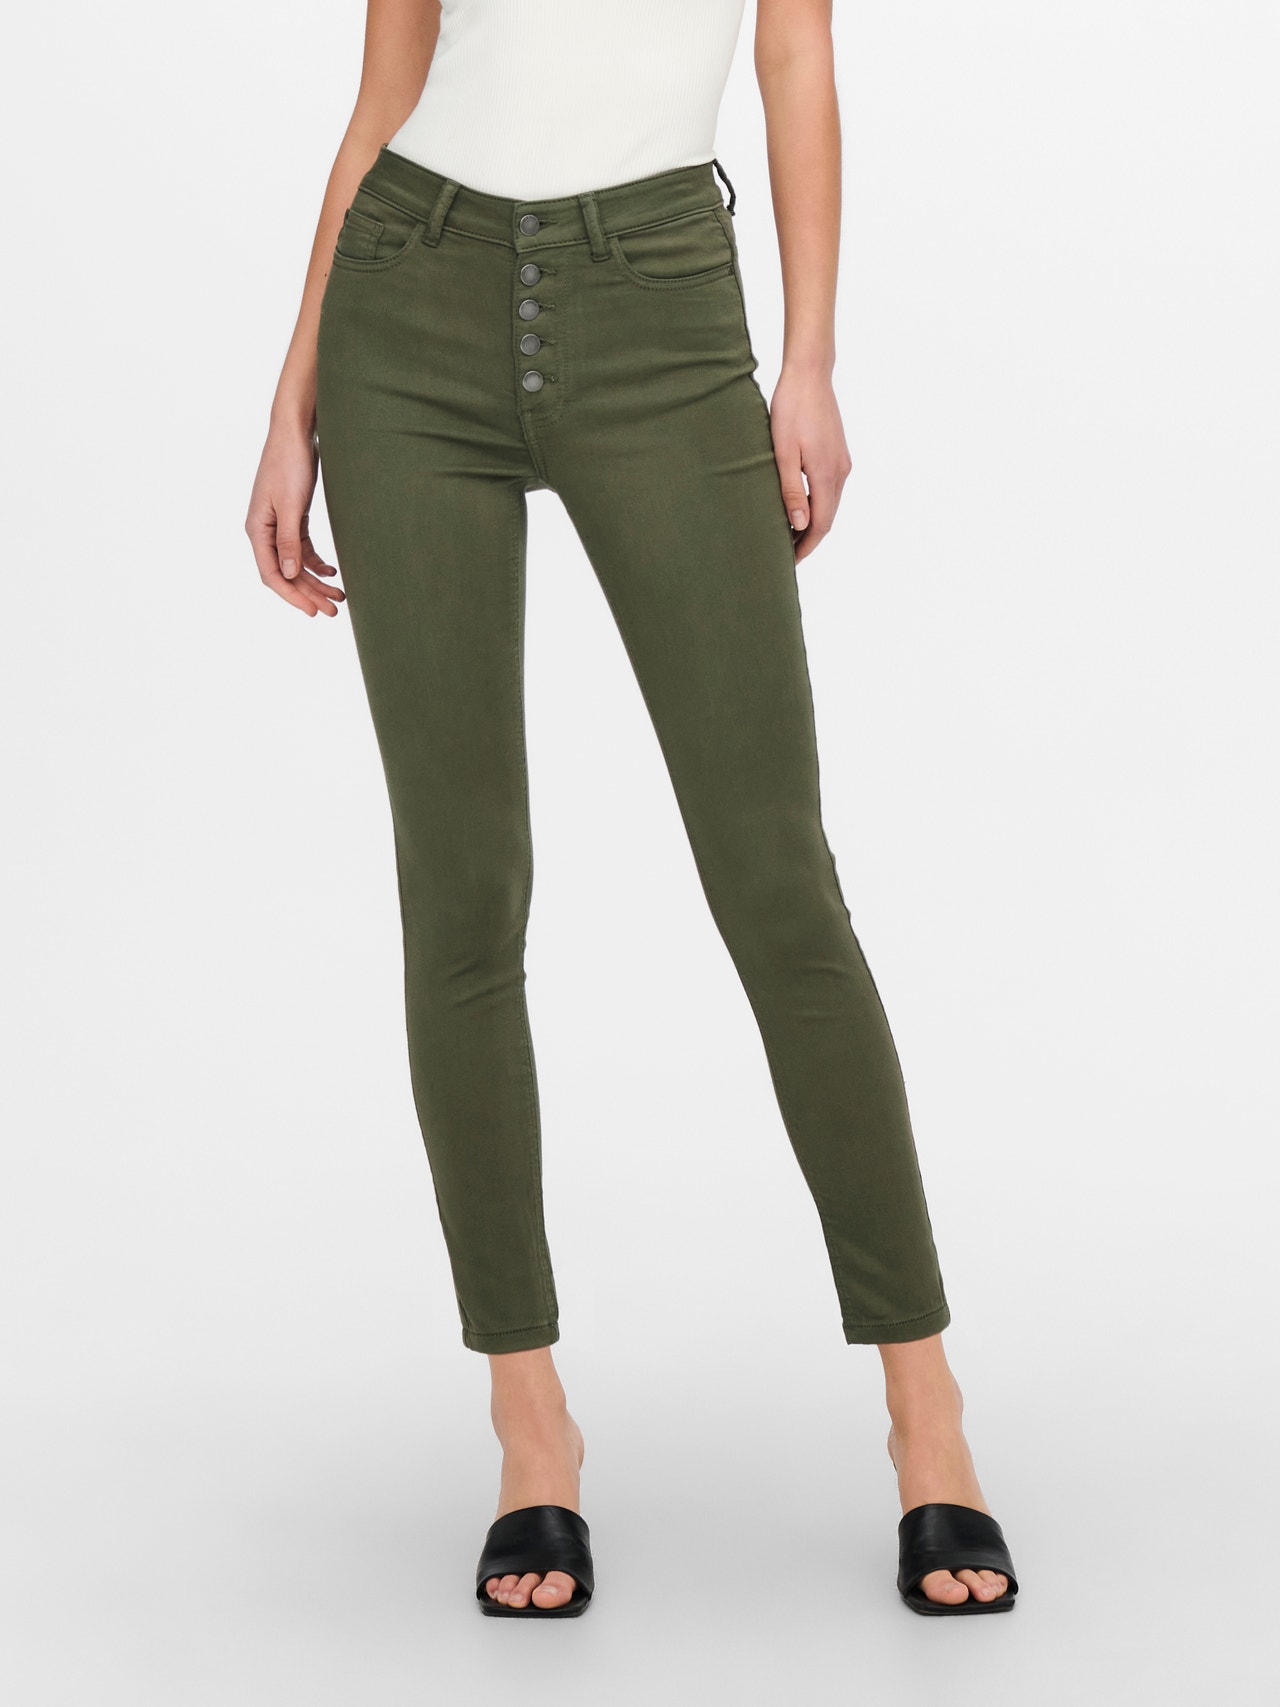 ONLY Skinny Fit Trousers -Kalamata - 15247662